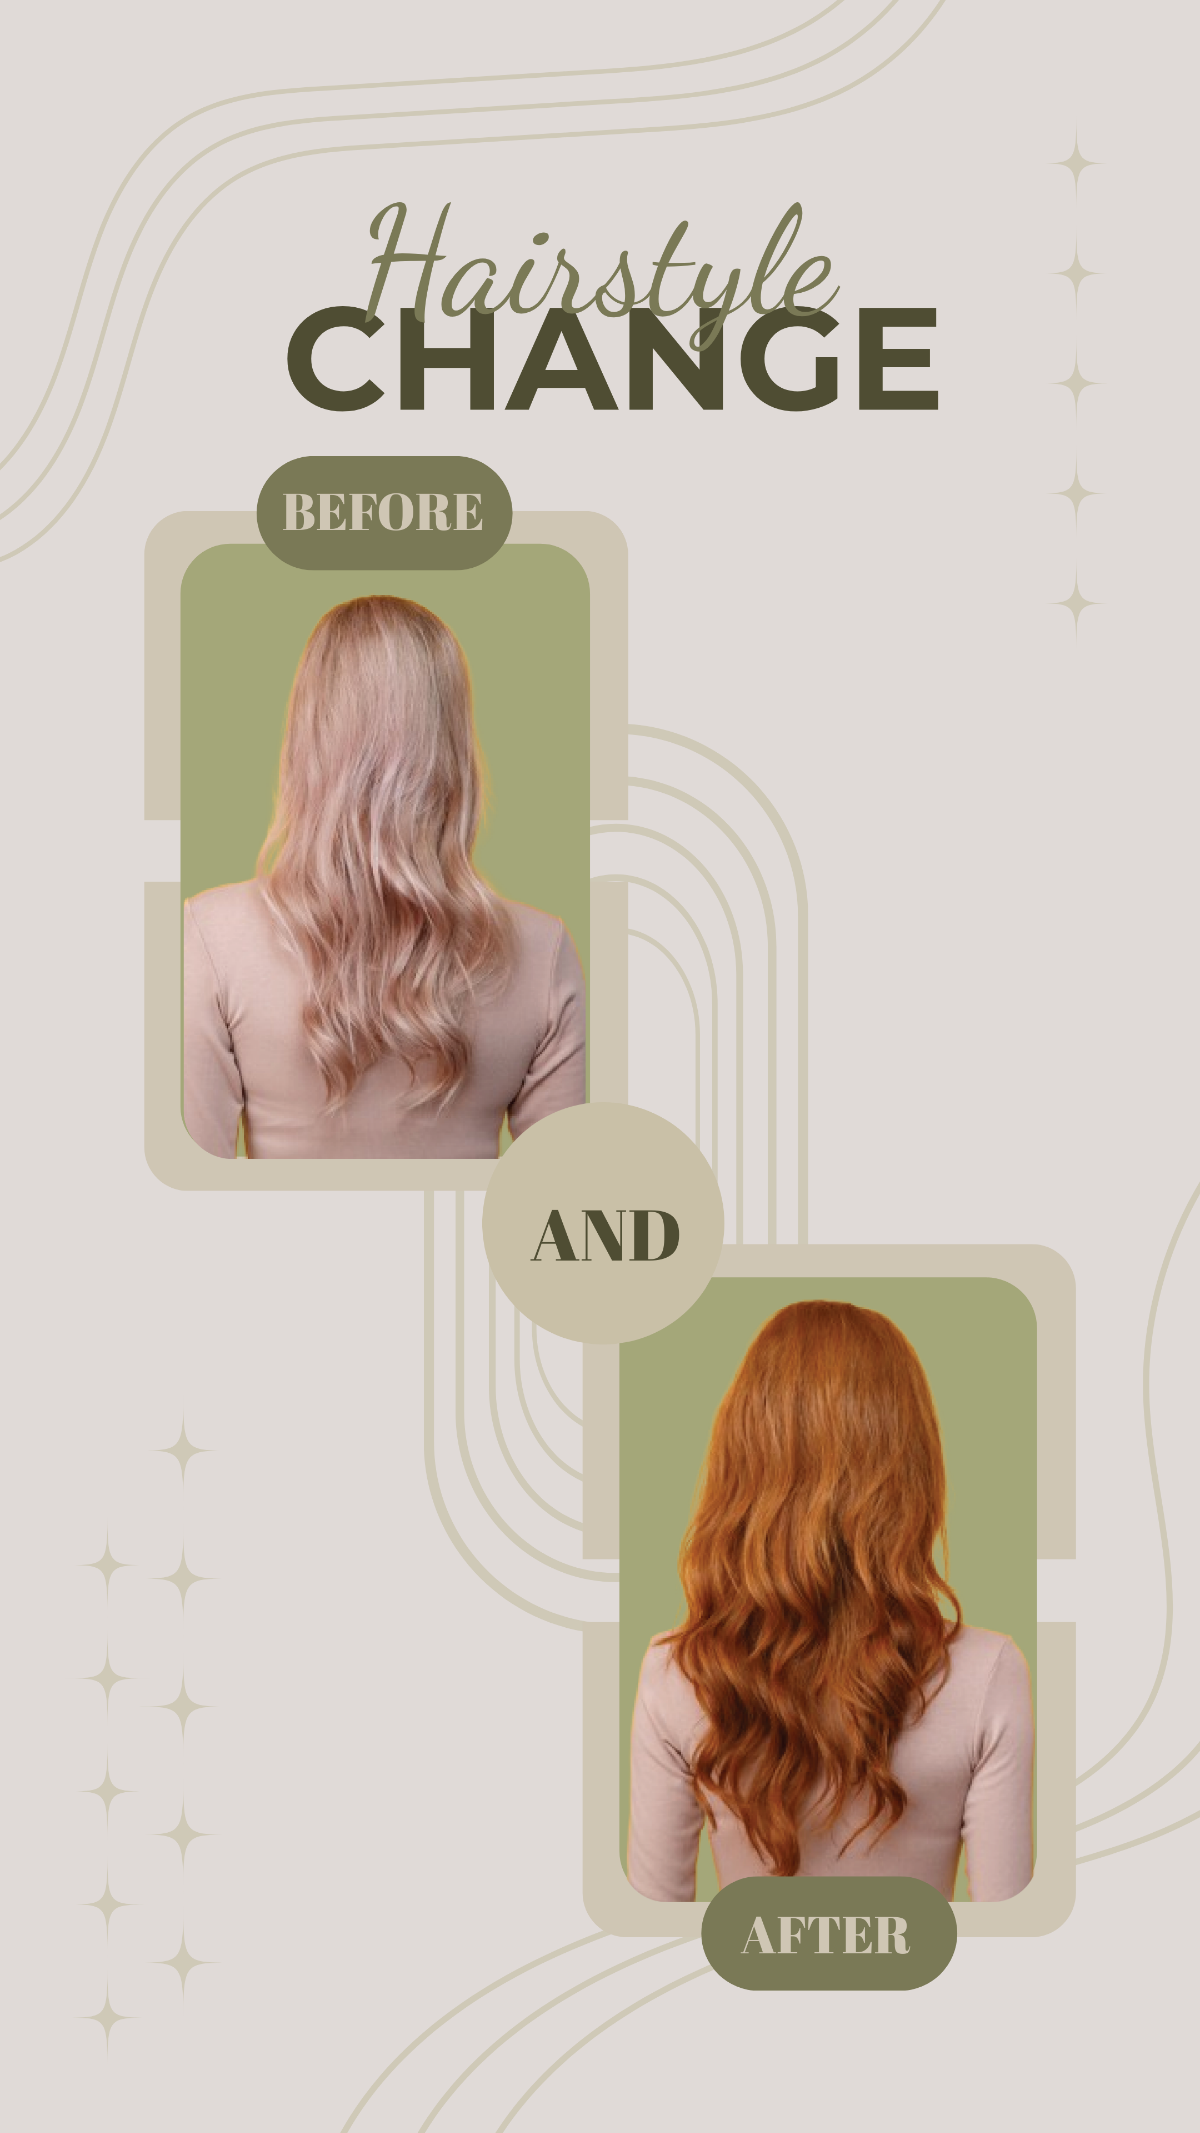 Hairstyle Before and After Photo Collage Instagram Post